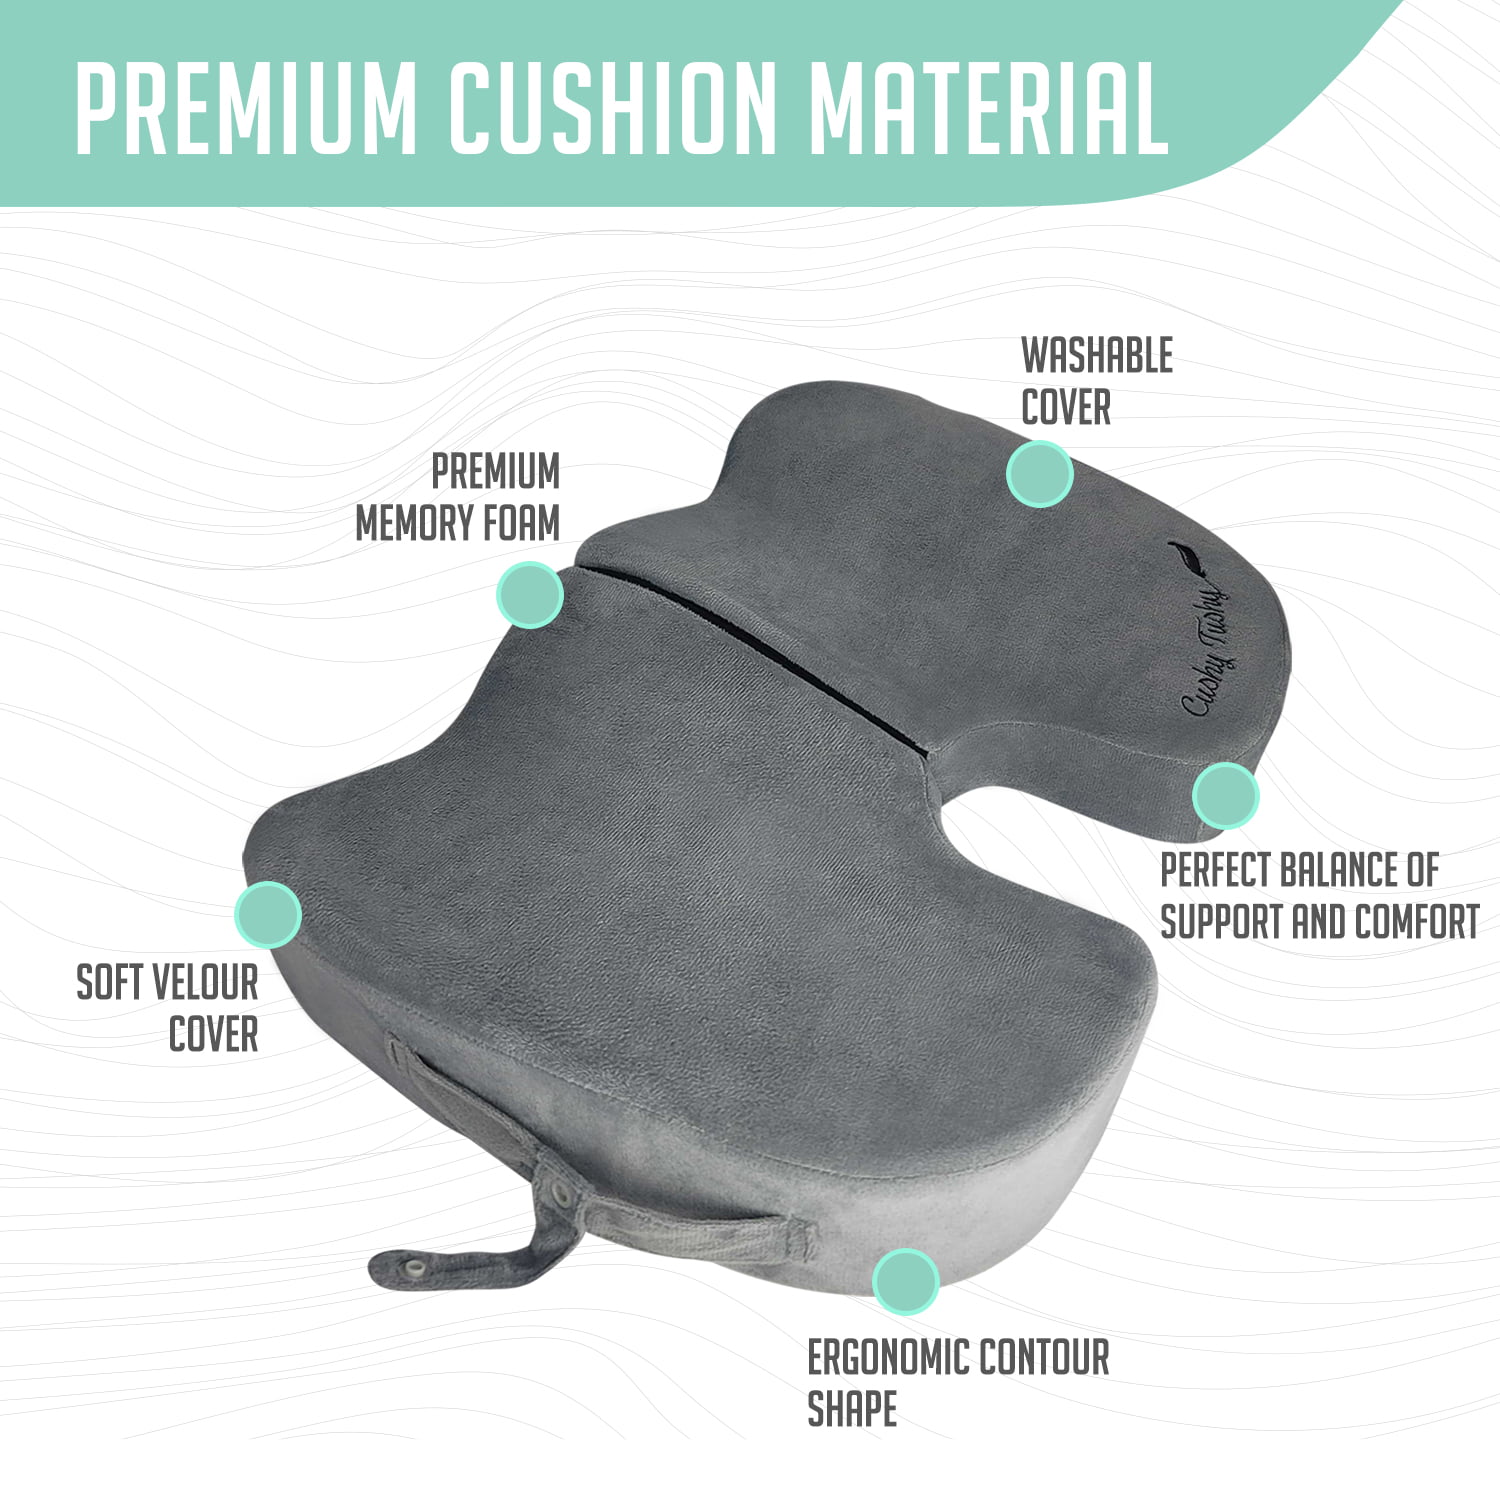 Cushy Tushy Foldable Sit Bone Seat Cushion - for Sit Bone Pain, Hip, Butt,  Ischial Tuberosity, Hamstrings, and Sciatica Pain Relief - for Home